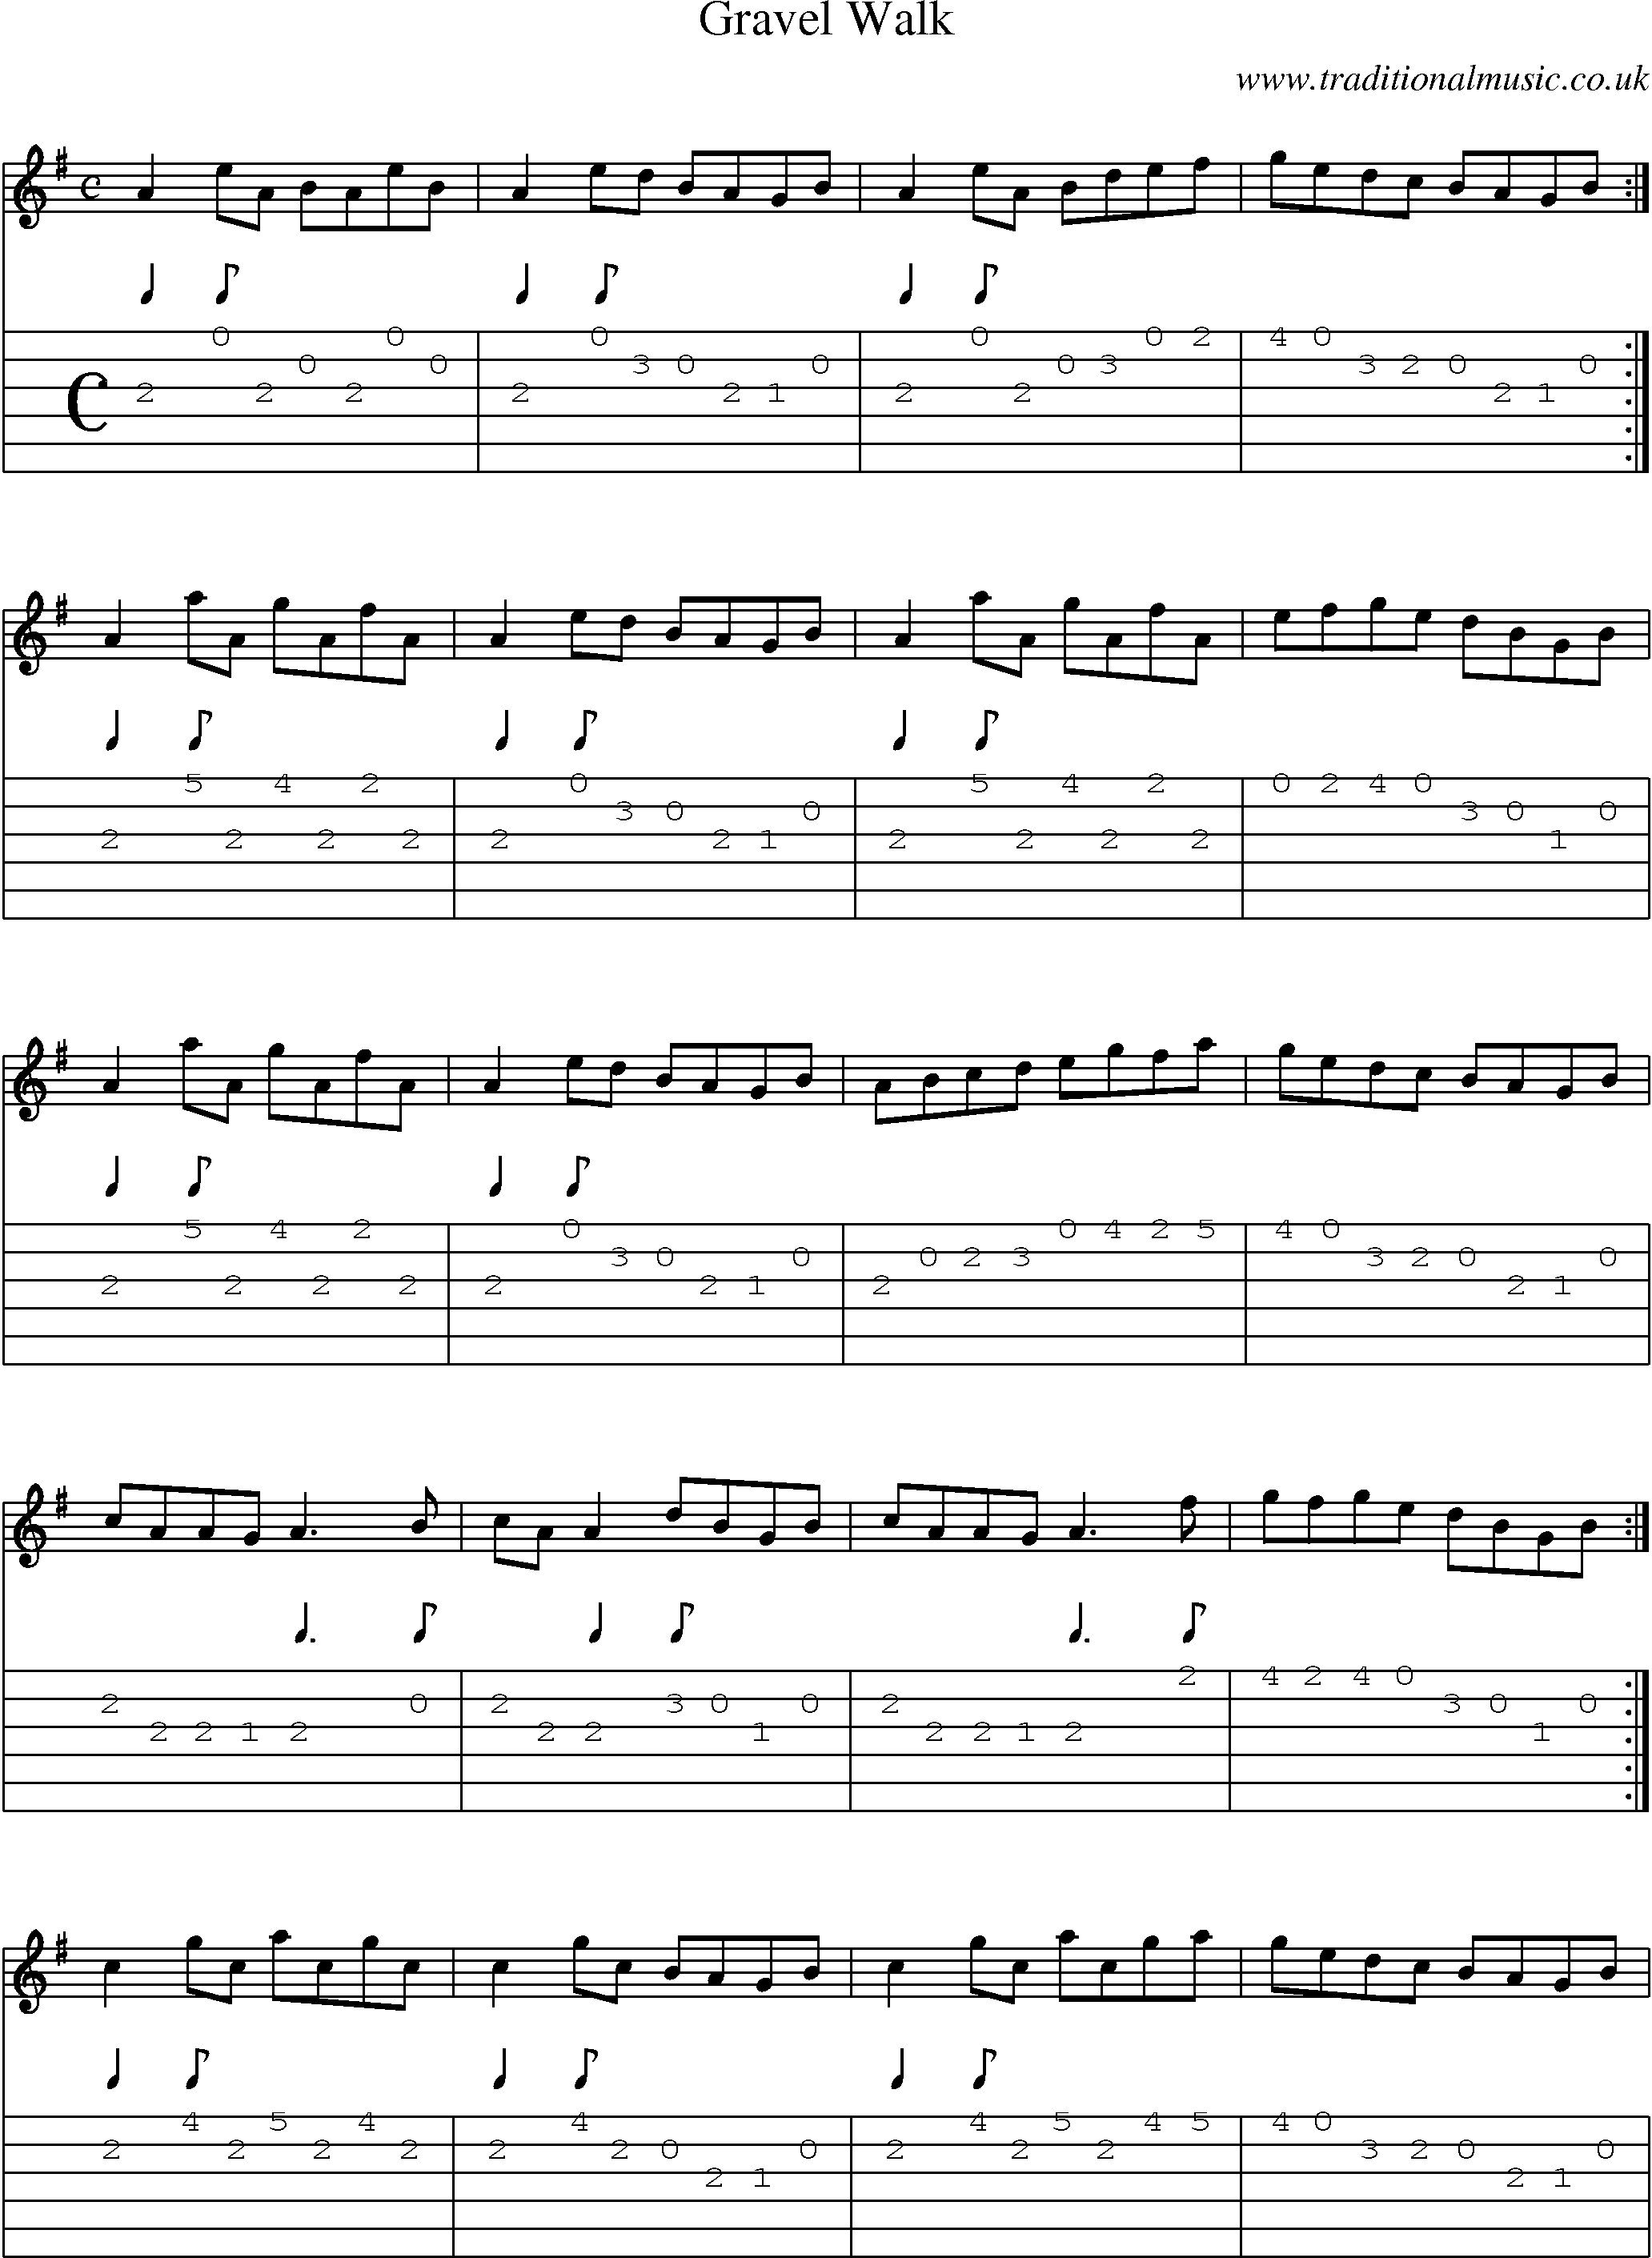 Music Score and Guitar Tabs for Gravel Walk